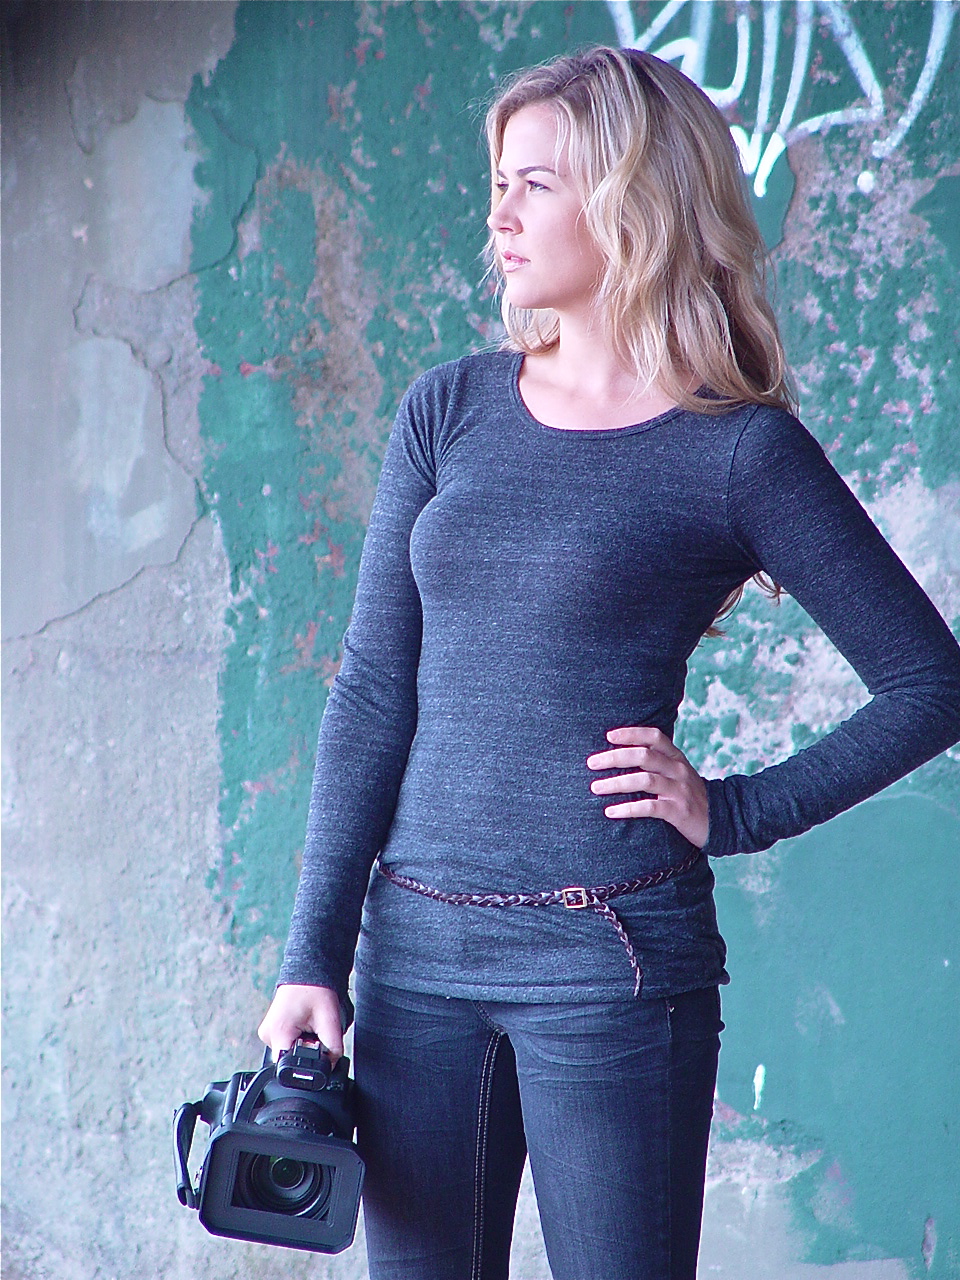 Cassie Jaye filming the feature documentary 